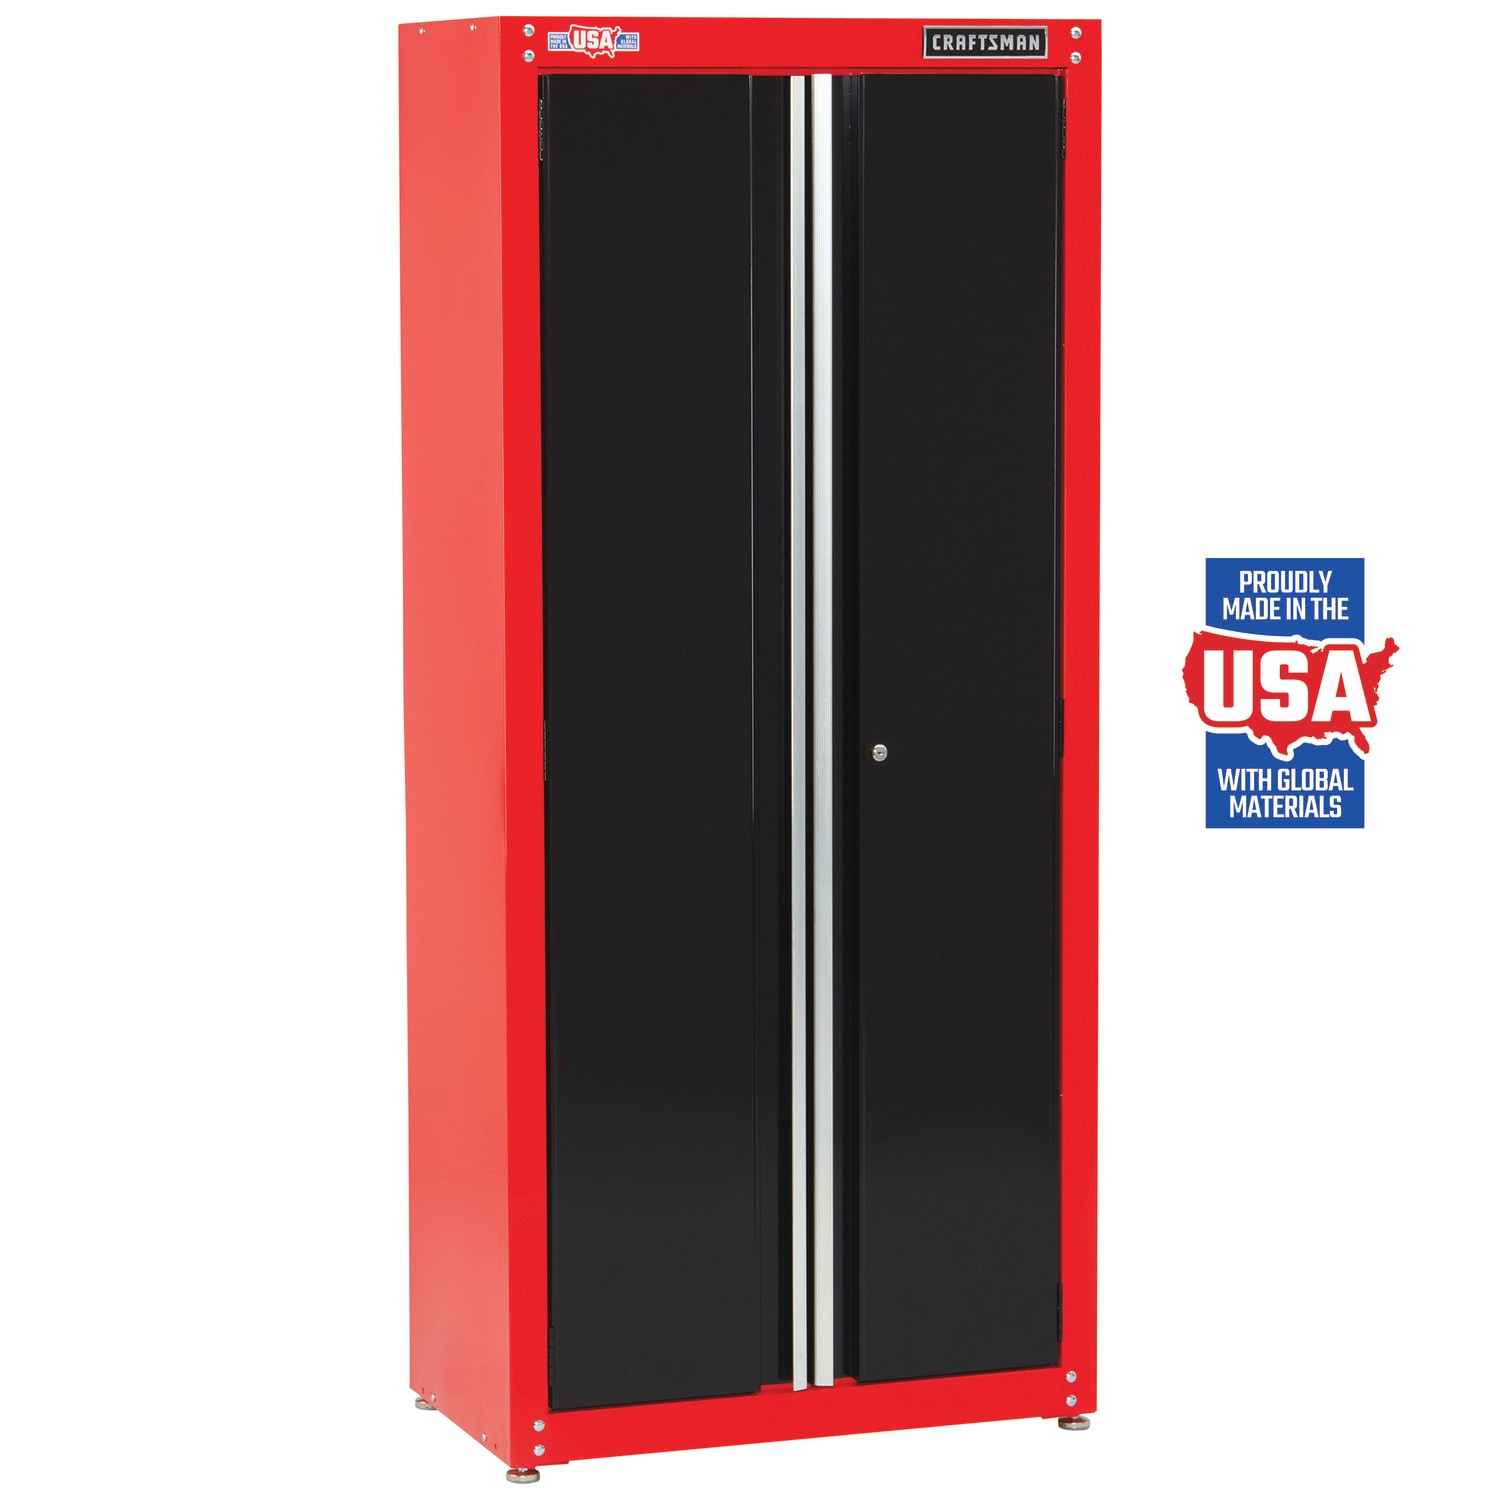 Best Buy: RubberMaid Deluxe Garden Tool Tower Garage Storage Unit Cabinet  with Coasters FG5E2800MICHR